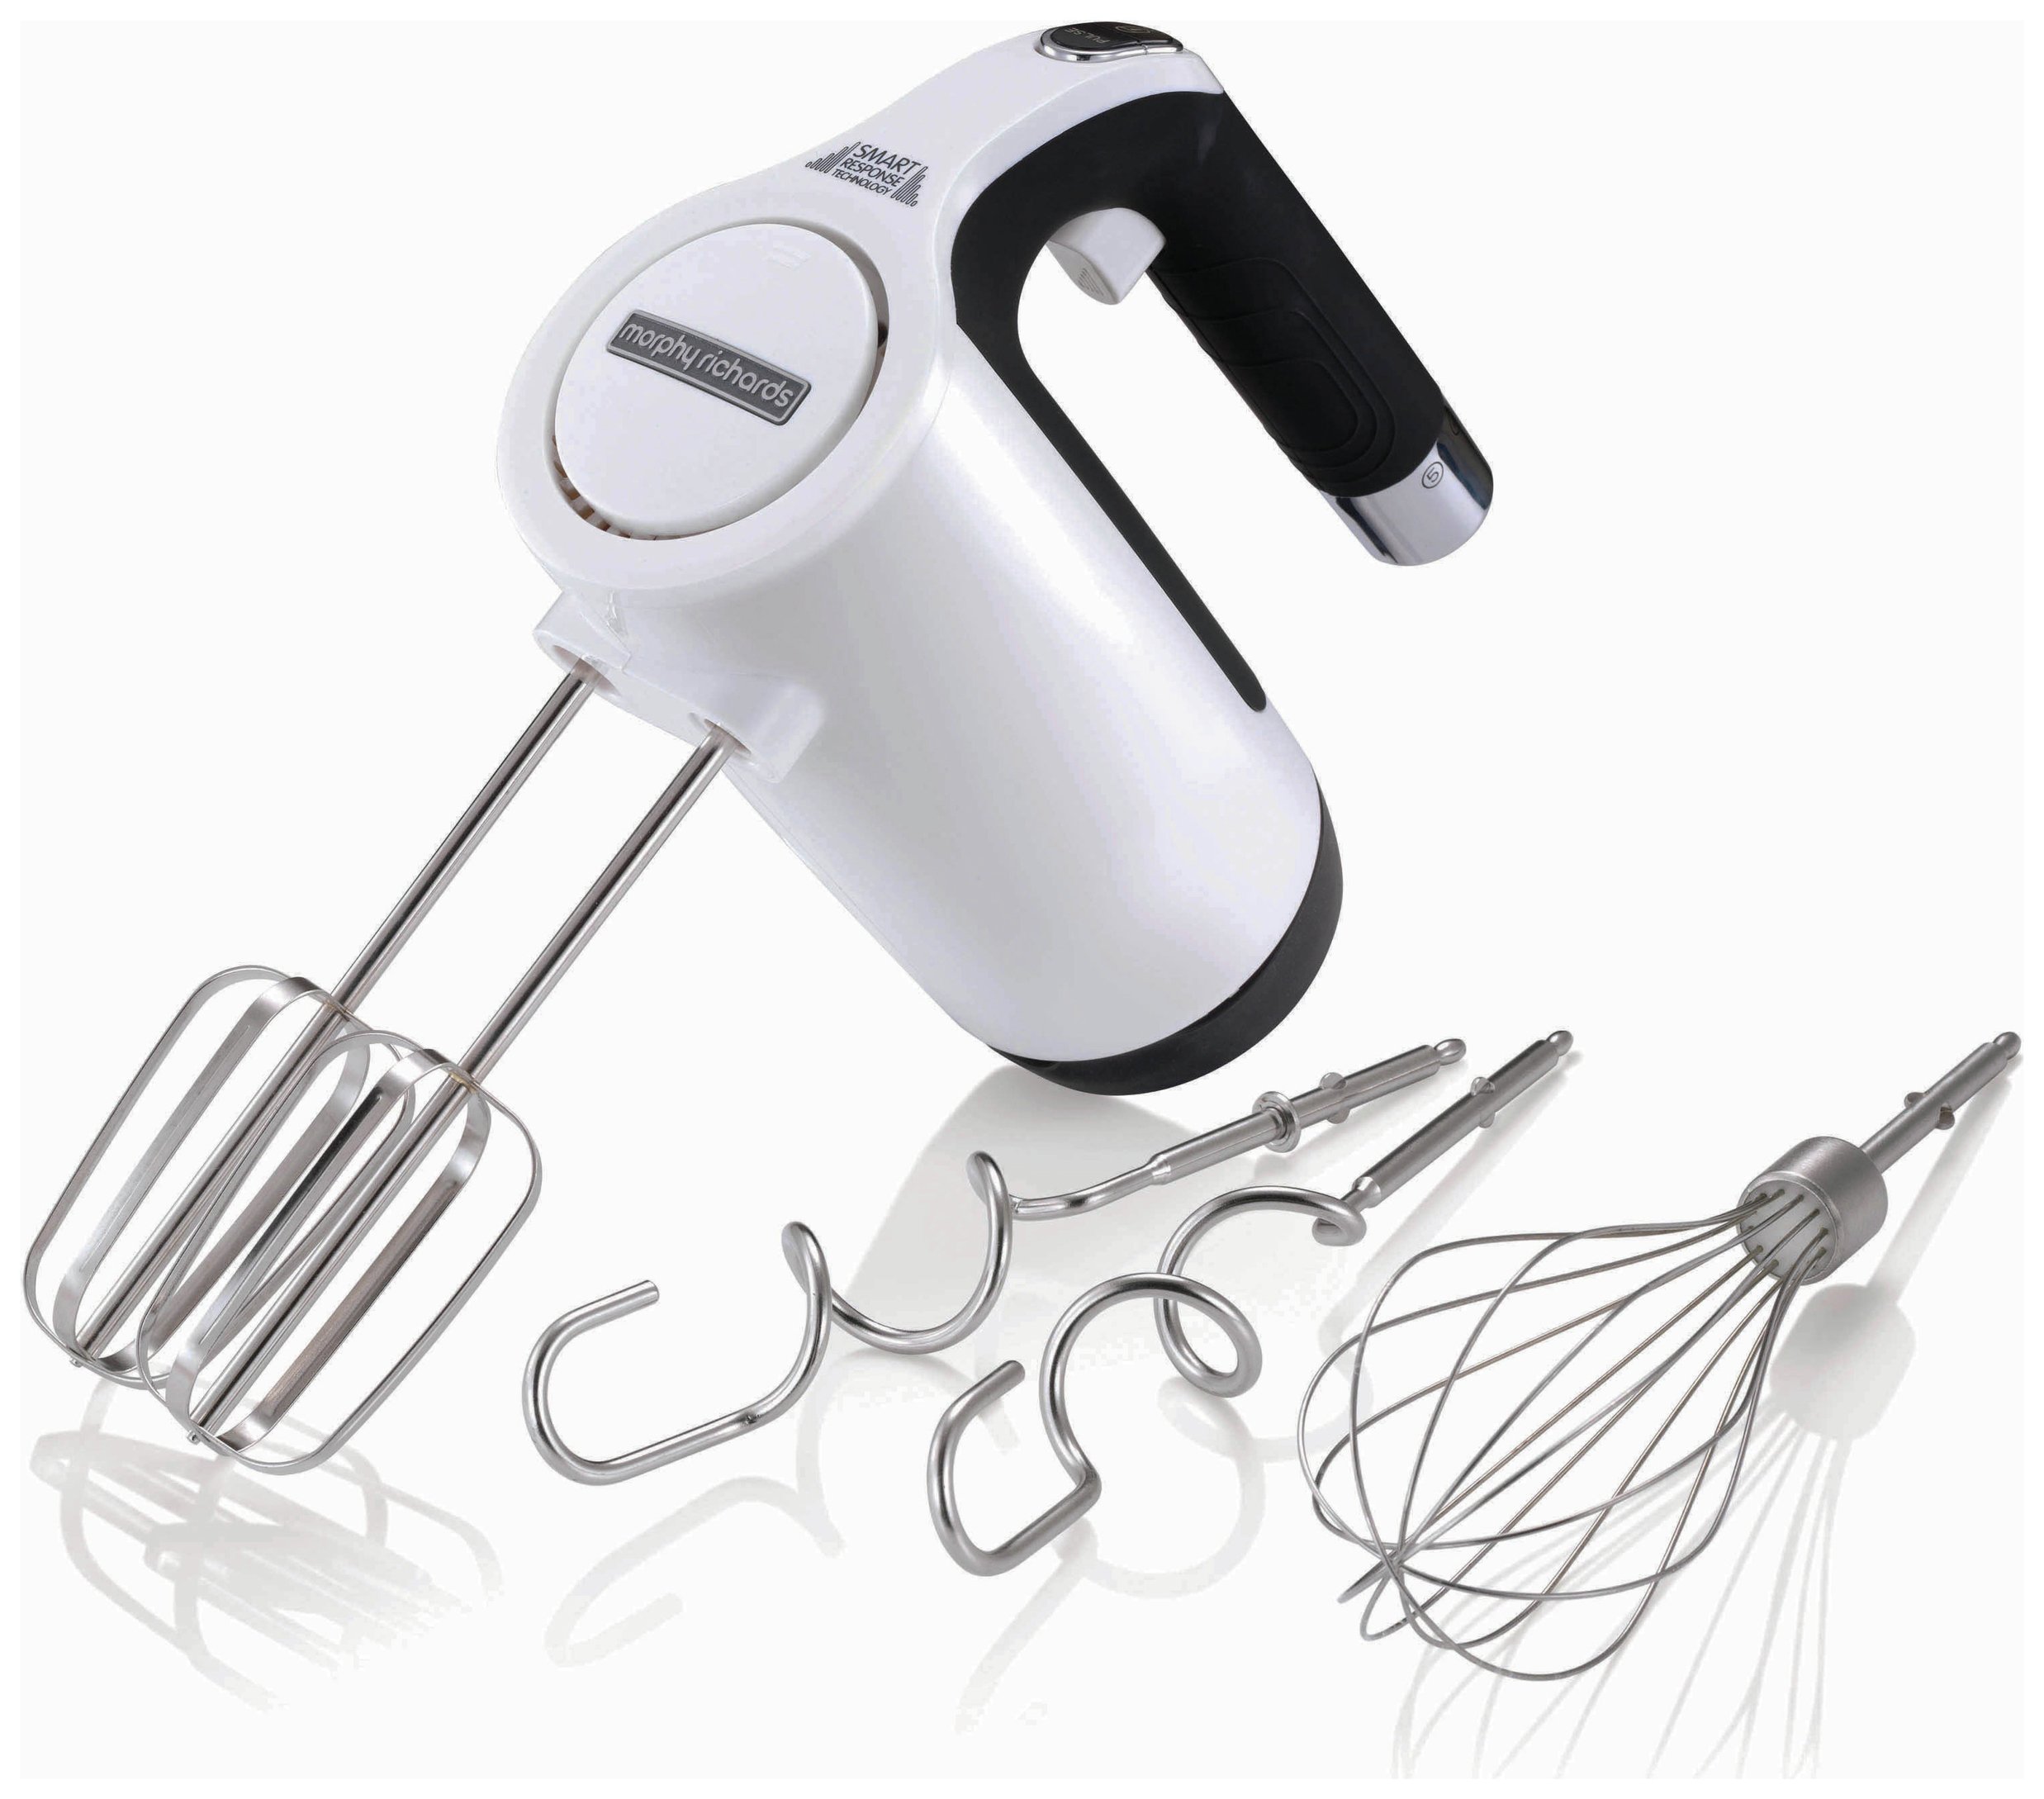 Morphy Richards Total Control Hand Mixer